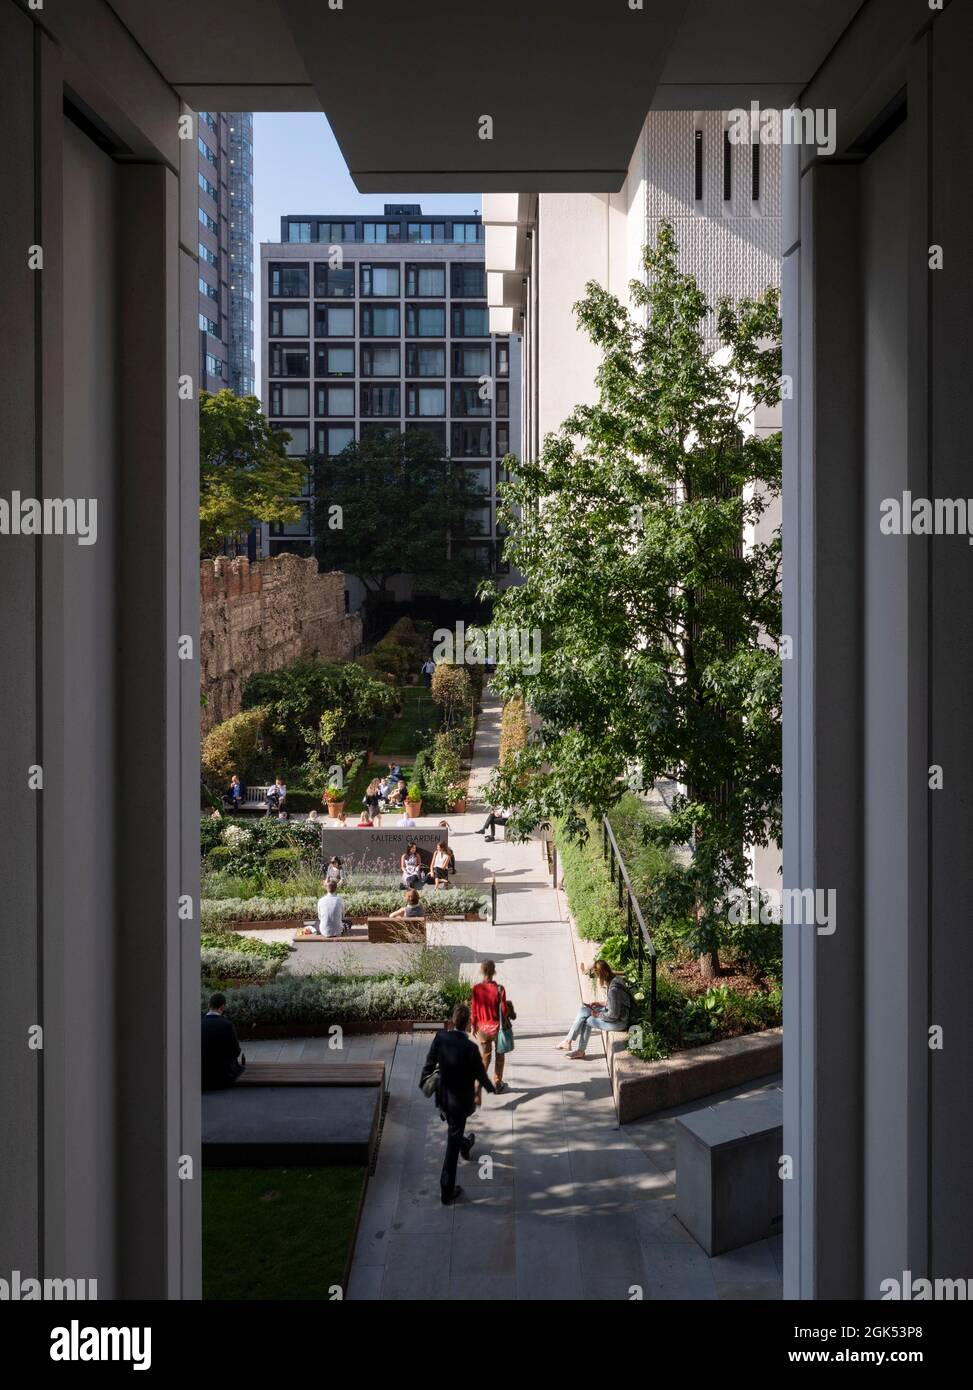 View through to landscaped gardens at lunchtime. London Wall Place, London, United Kingdom. Architect: Make Ltd, 2019. Stock Photo